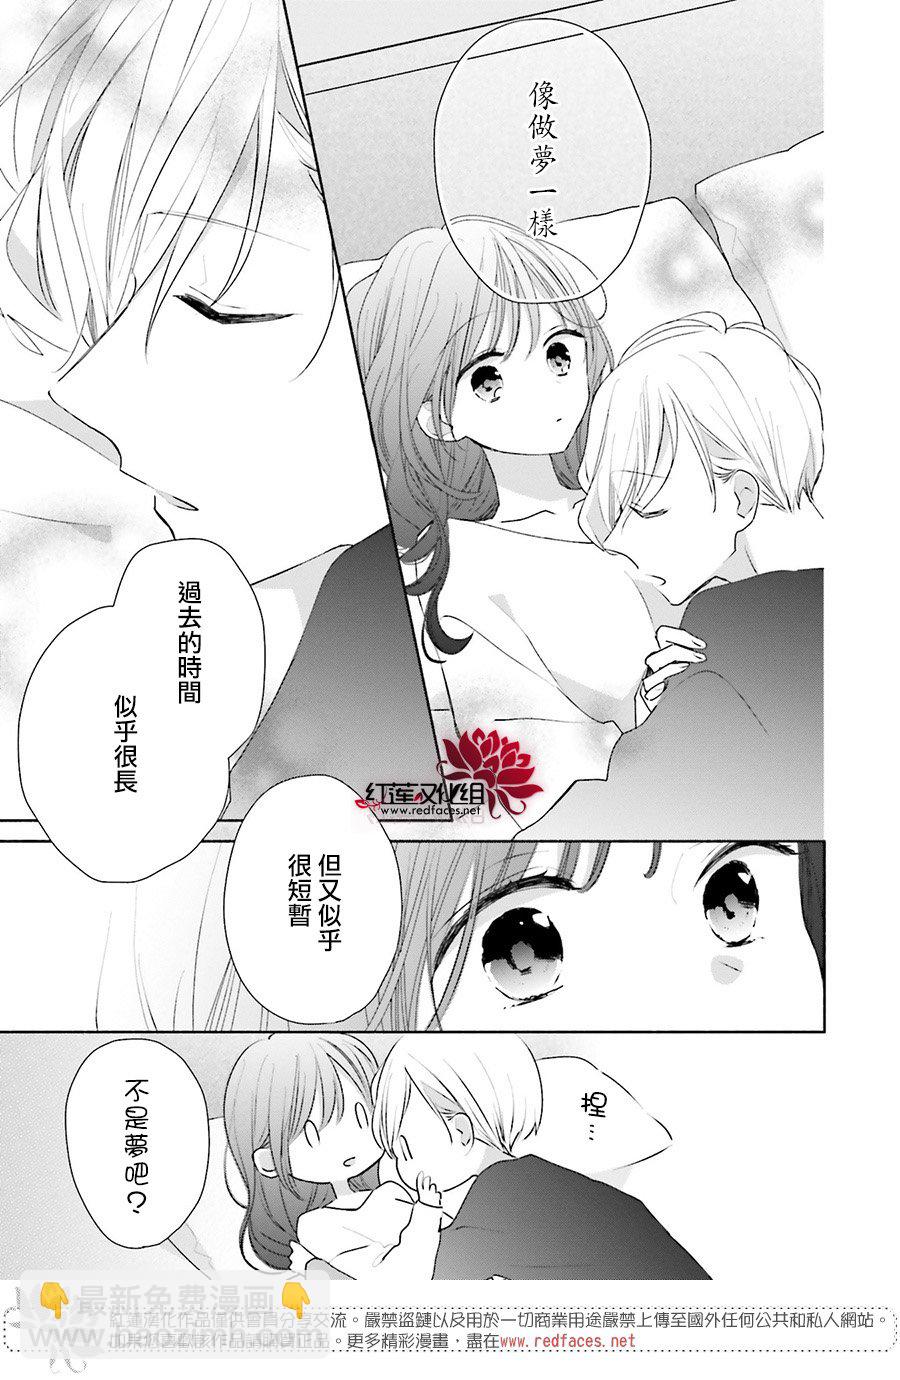 If given a second chance - 第46話(2/2) - 5